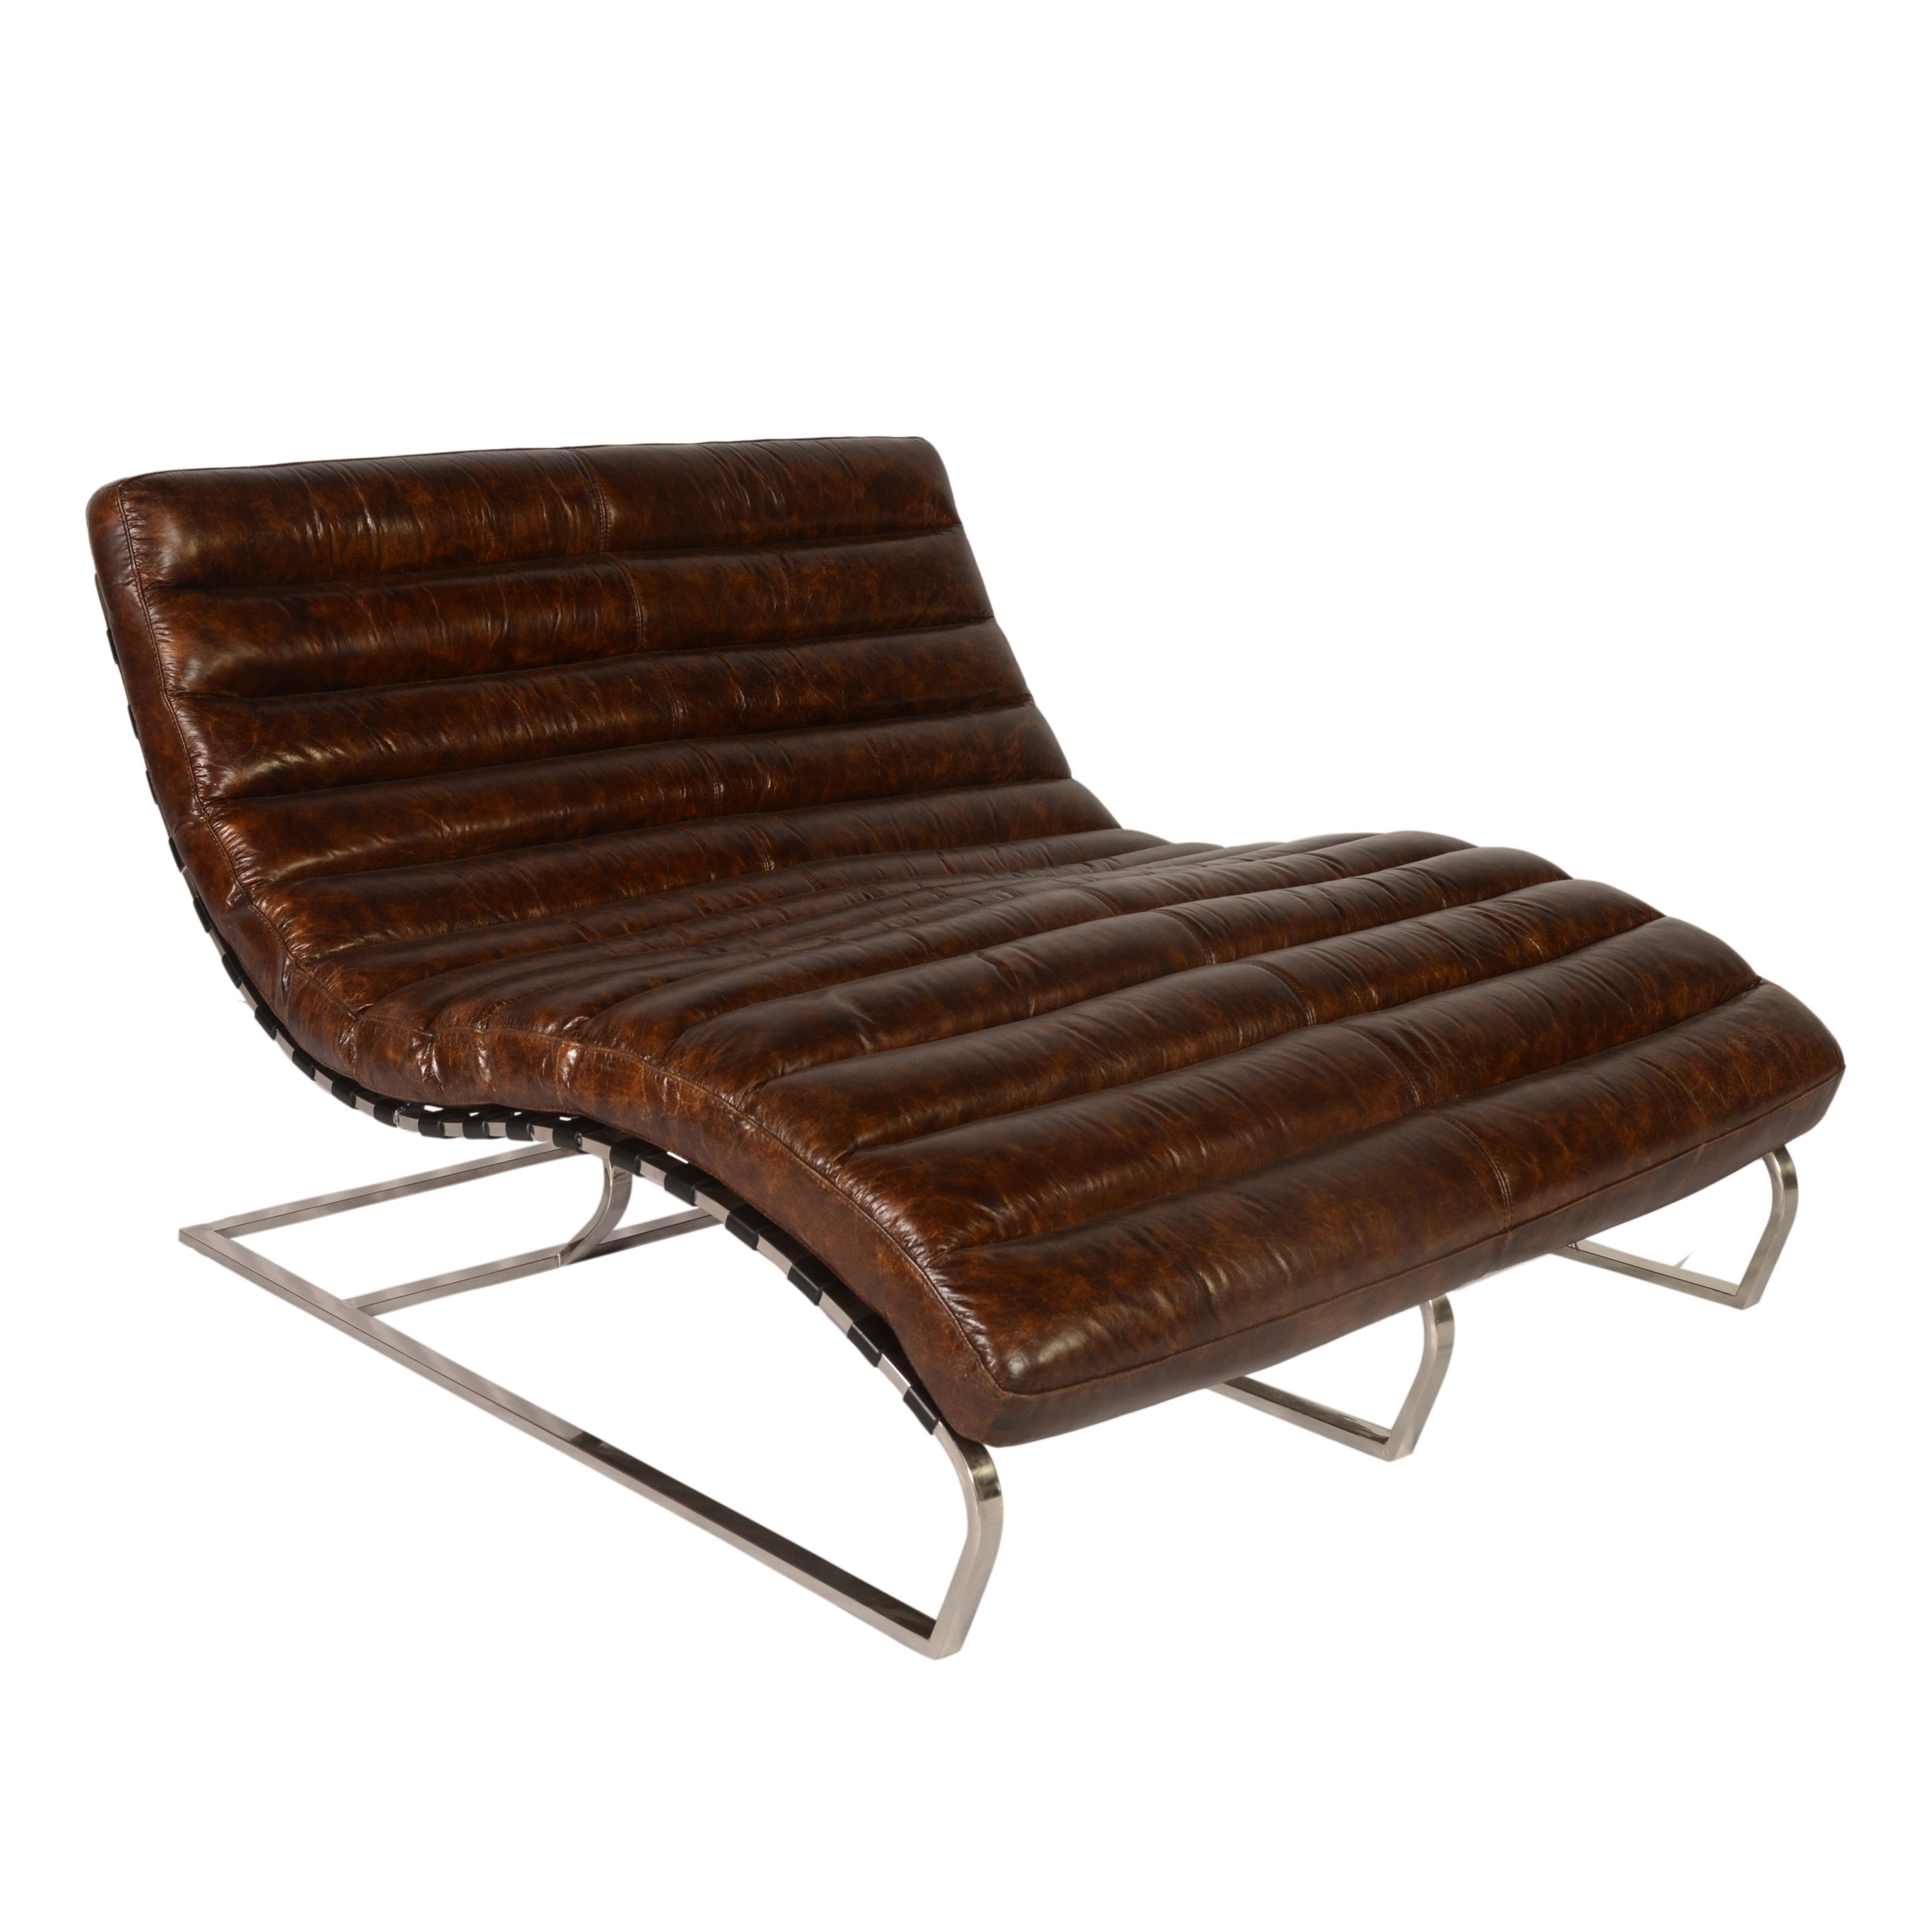 Lazzaro leather perici leather double chaise lounge wayfair